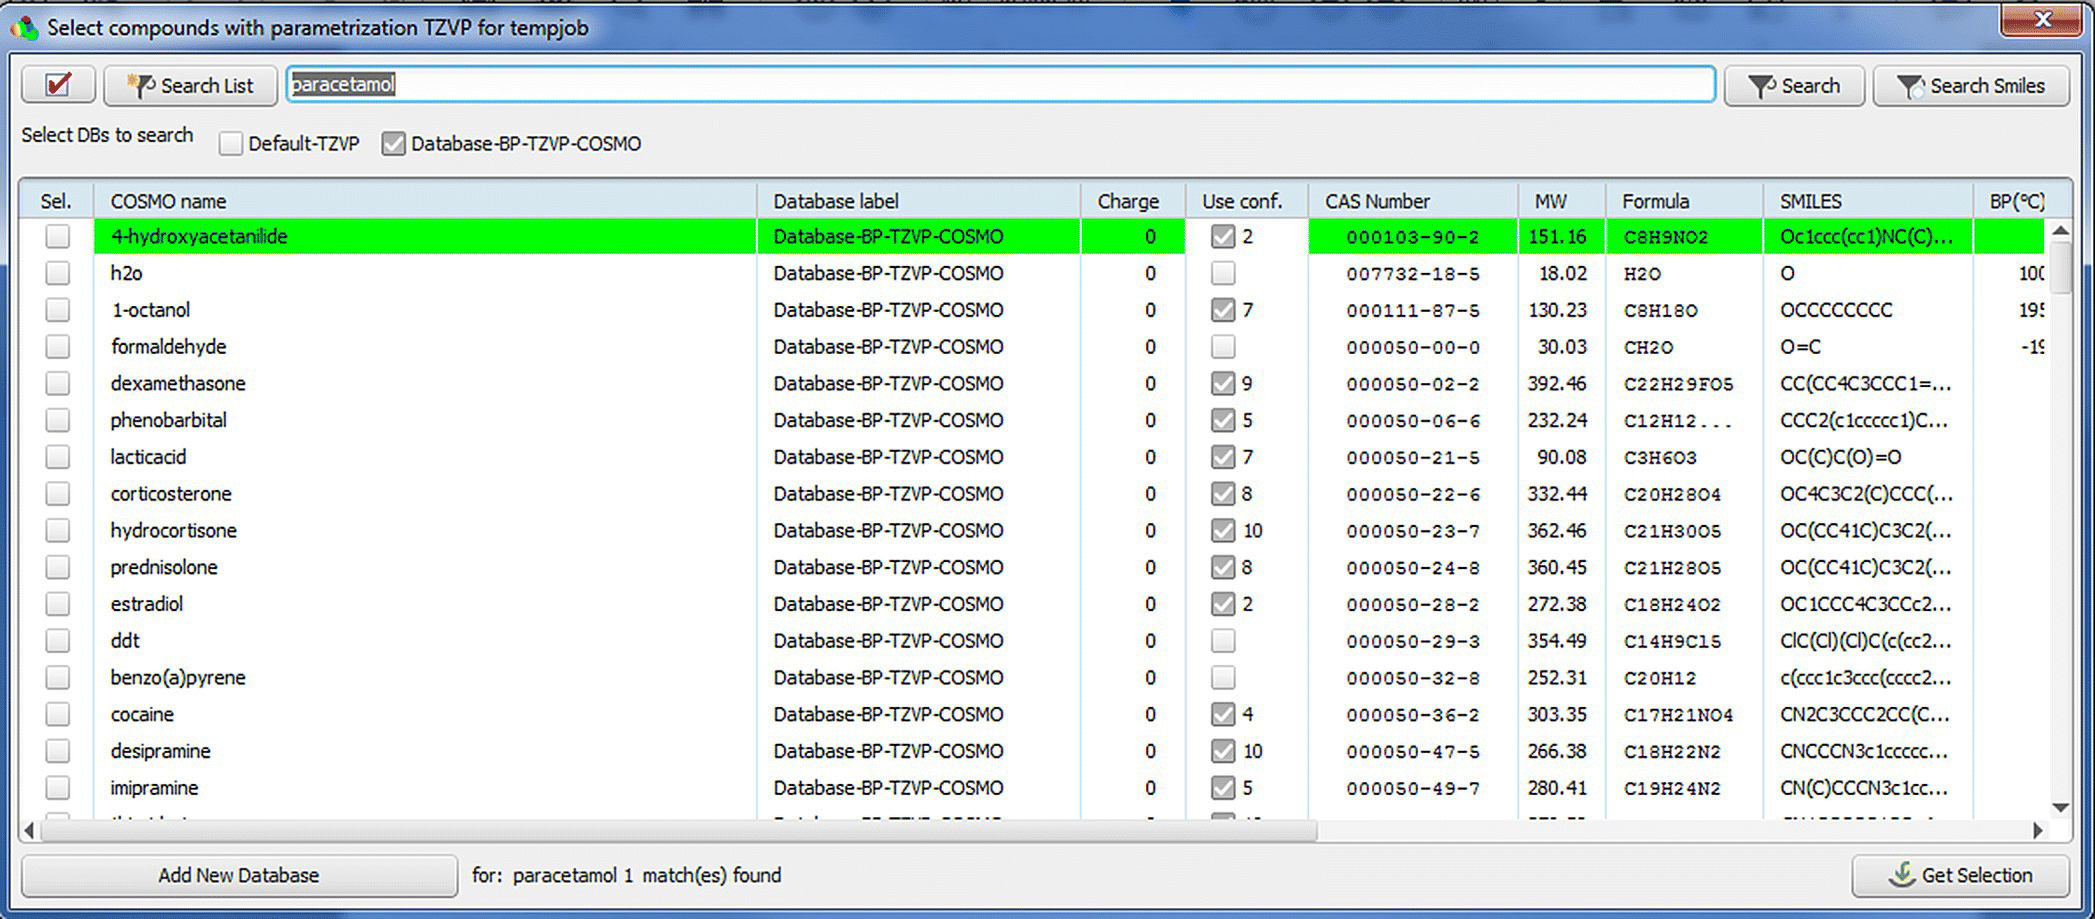 Screenshot of Select compounds with parameterization TZVP for tempjob window displaying a data entry field for search list labeled paracetamol. Under select DBs to search is a checked box for Database-BP-TZVP-COSMO.